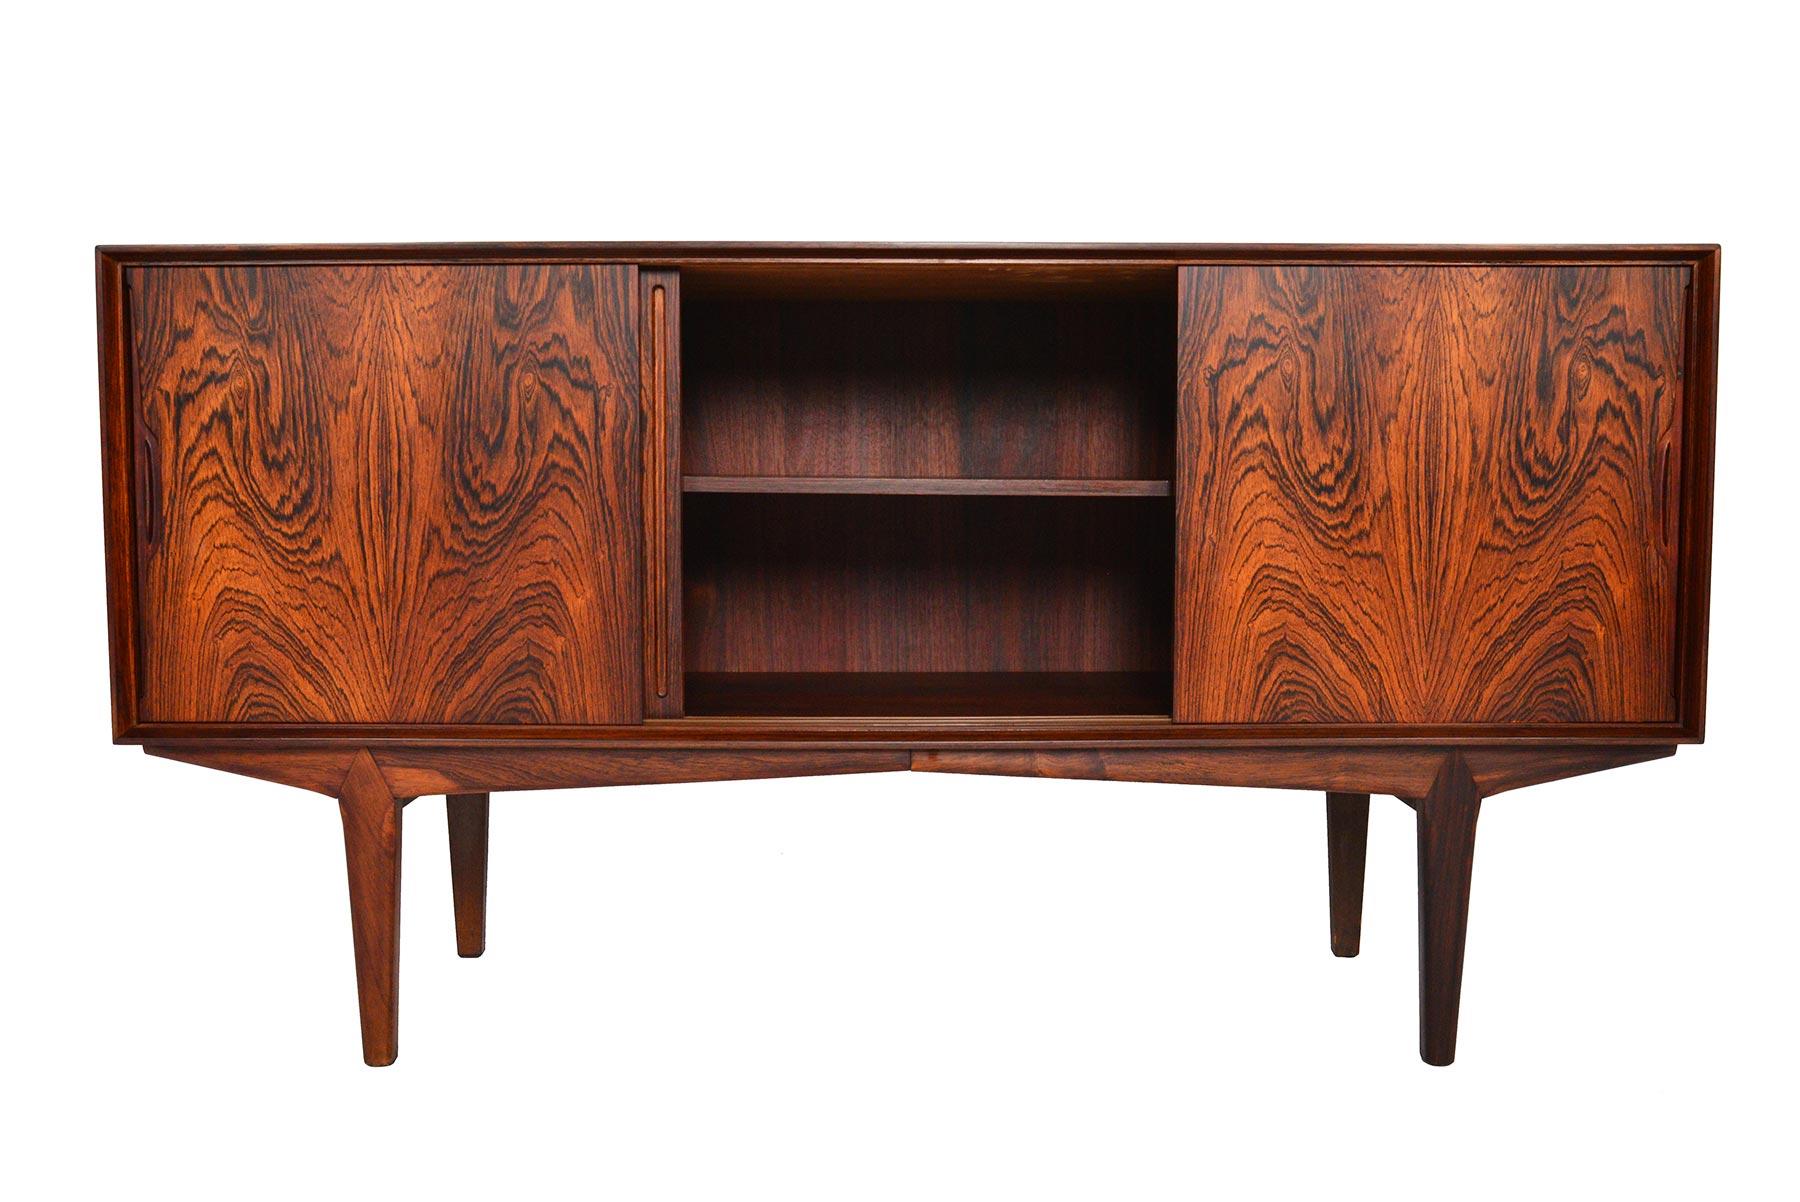 This gorgeous rosewood credenza model was designed by O. Frandsen for Knud Nielsen in the 1960s. Minimalist details and expert craftsmanship showcase dramatic book- matched Brazilian rosewood grain. Three sliding doors open to two bays outfitted